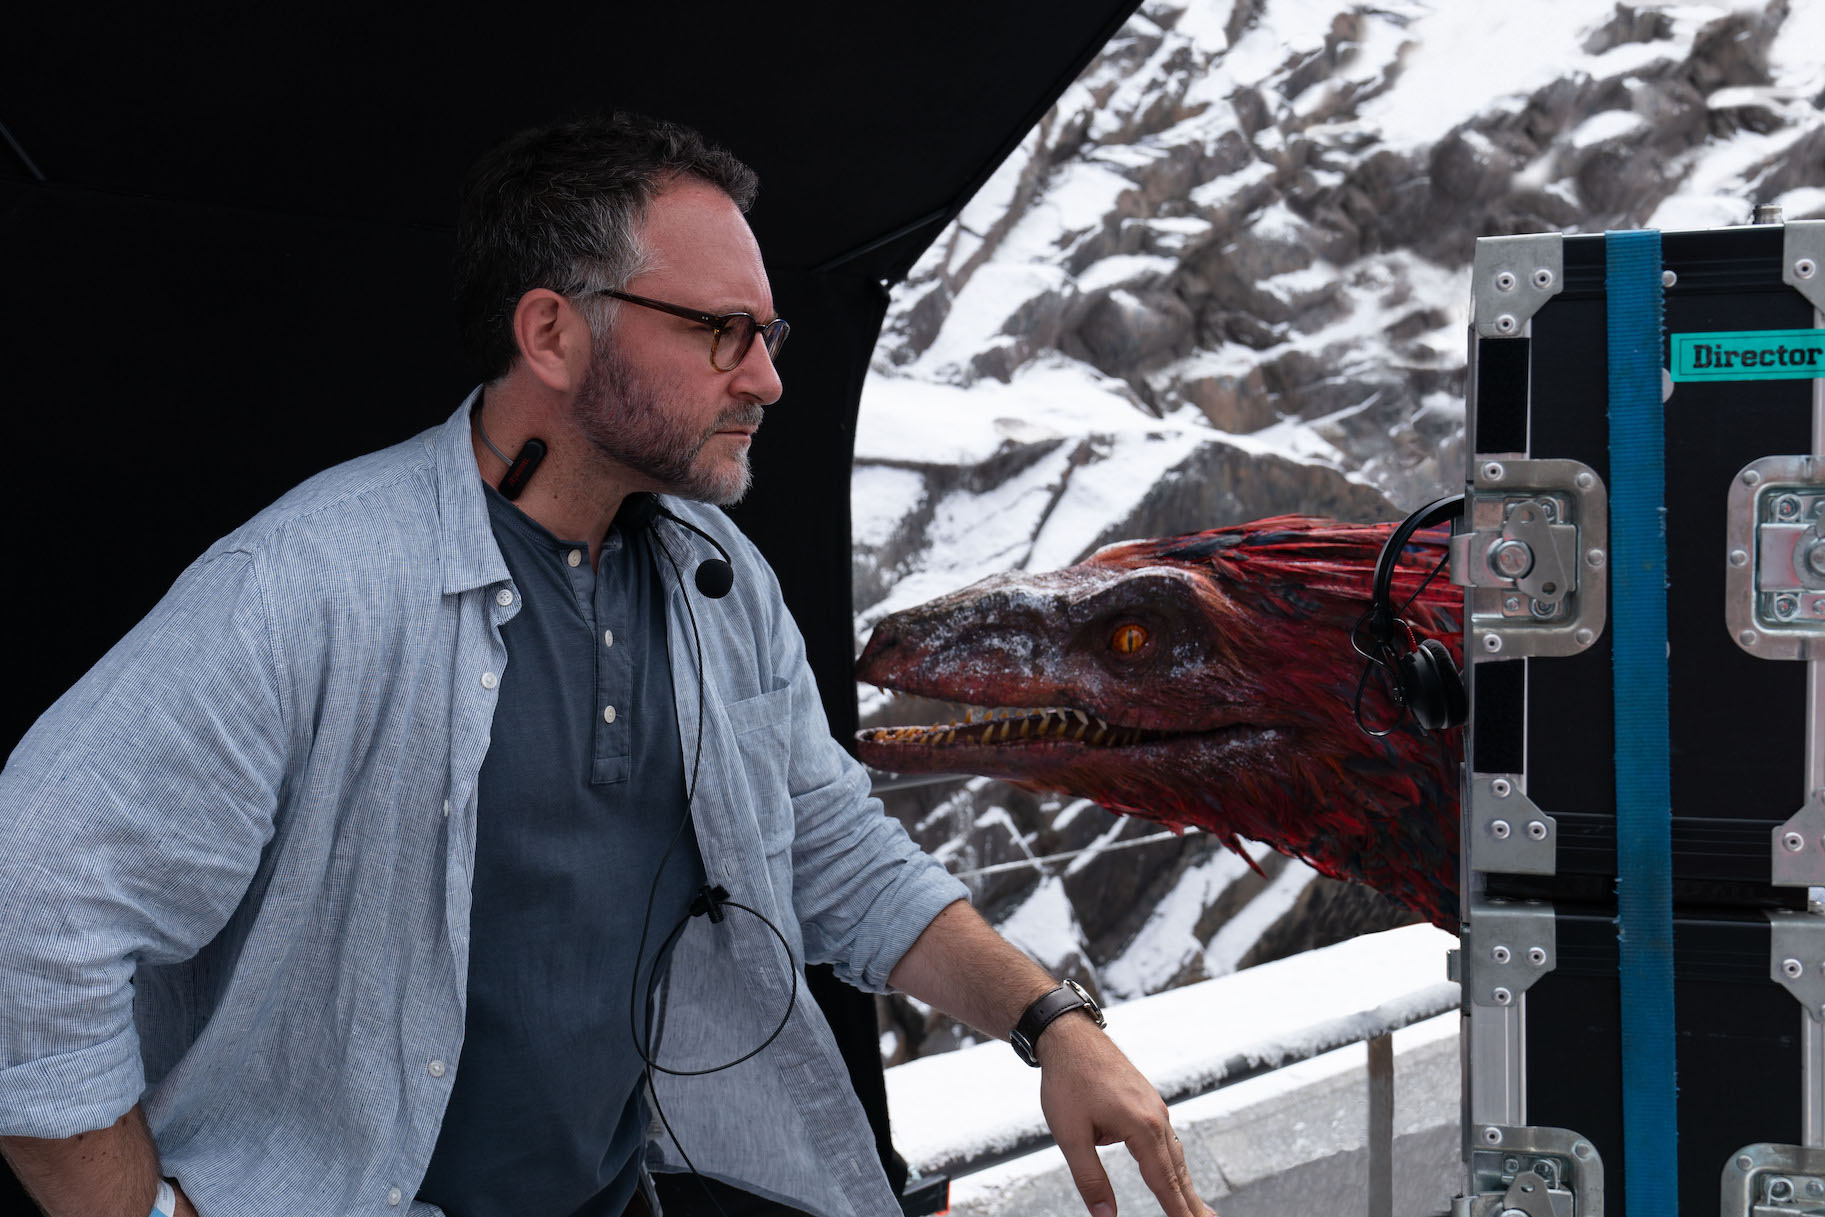 New 'Jurassic World' movie in the works with 'Jurassic Park' writer